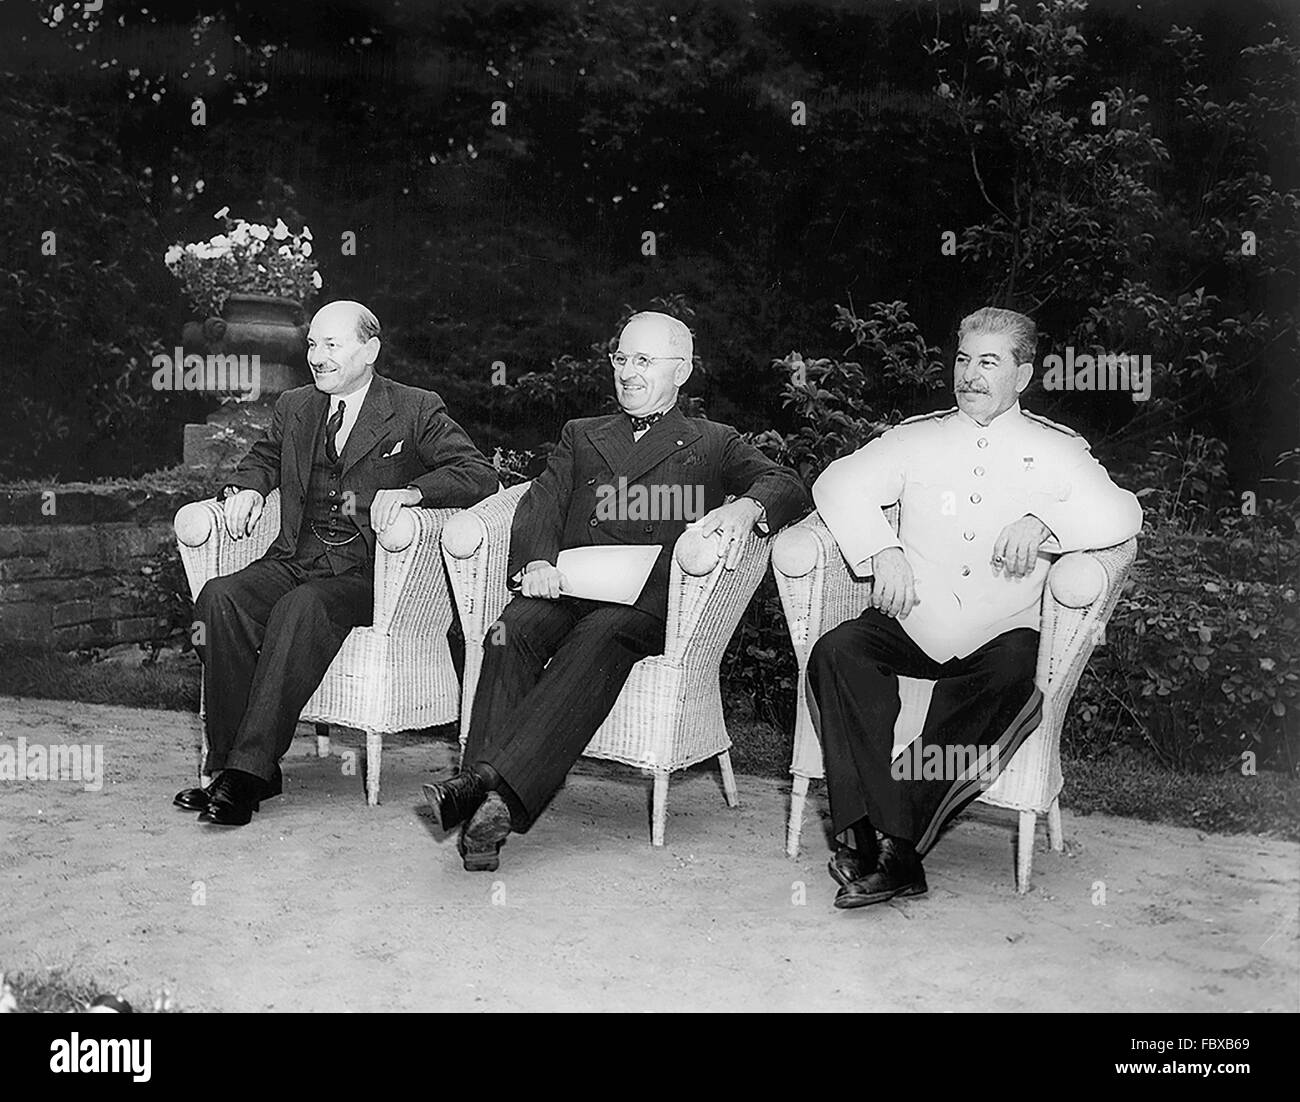 Potsdam Conference, August 1945. British Prime Minister Clement Attlee, US President Harry S Truman, and Soviet Premier Joseph Stalin at the Potsdam Conference (previously referred to as the Berlin Conference) on August 1st 1945 Stock Photo